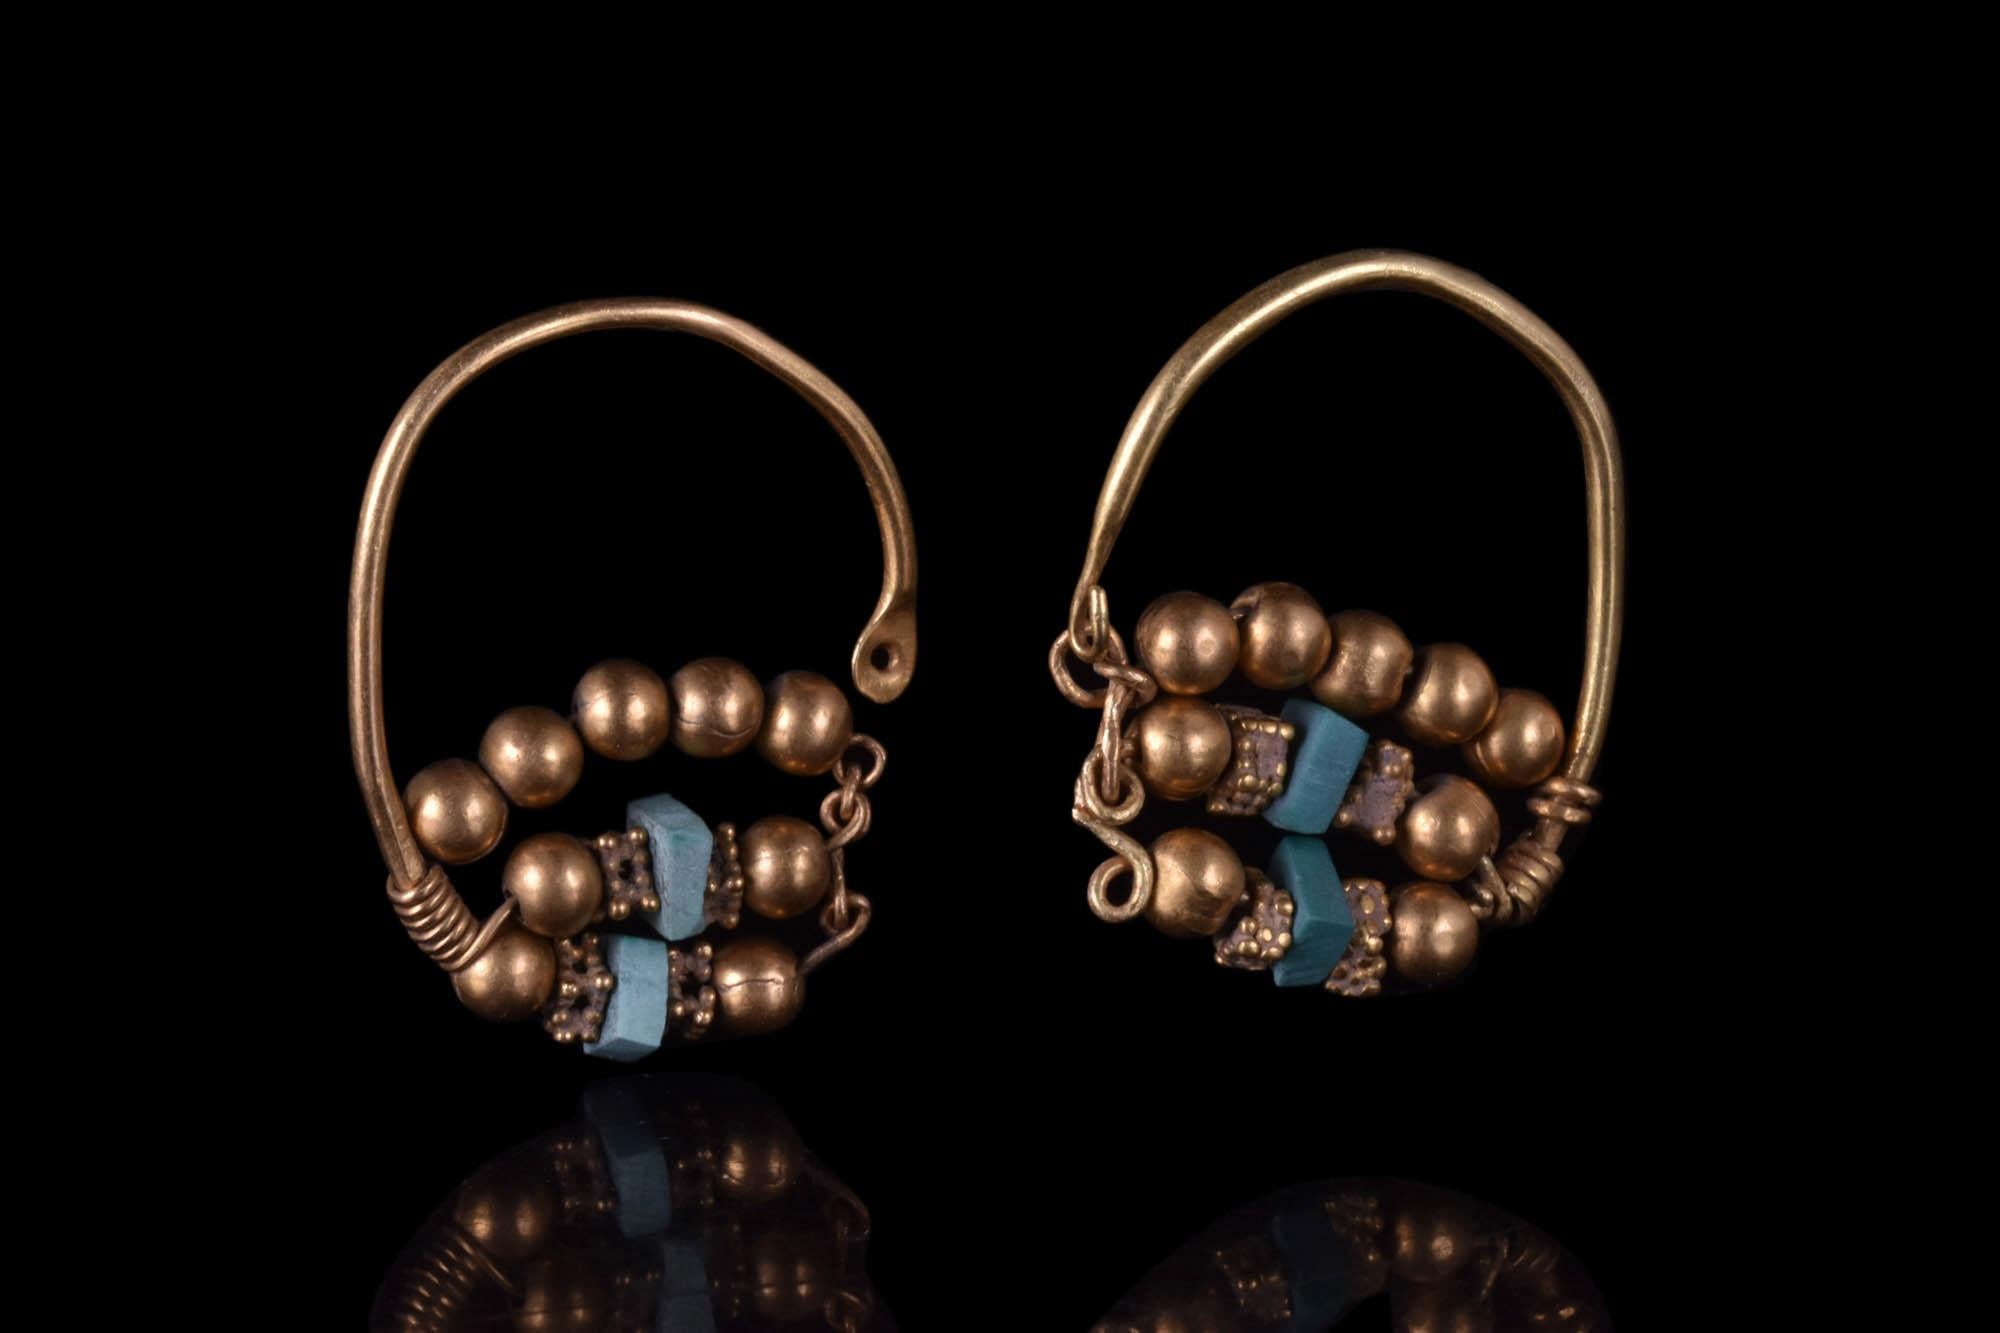 A matched pair of gold earrings, each made of a wire elongated hoop culminating with a teardrop turquoise cabochon. The bottom half of the loop is decorated with three rows of gold baubles, and the turquoise adornments are flanked by four beaded,